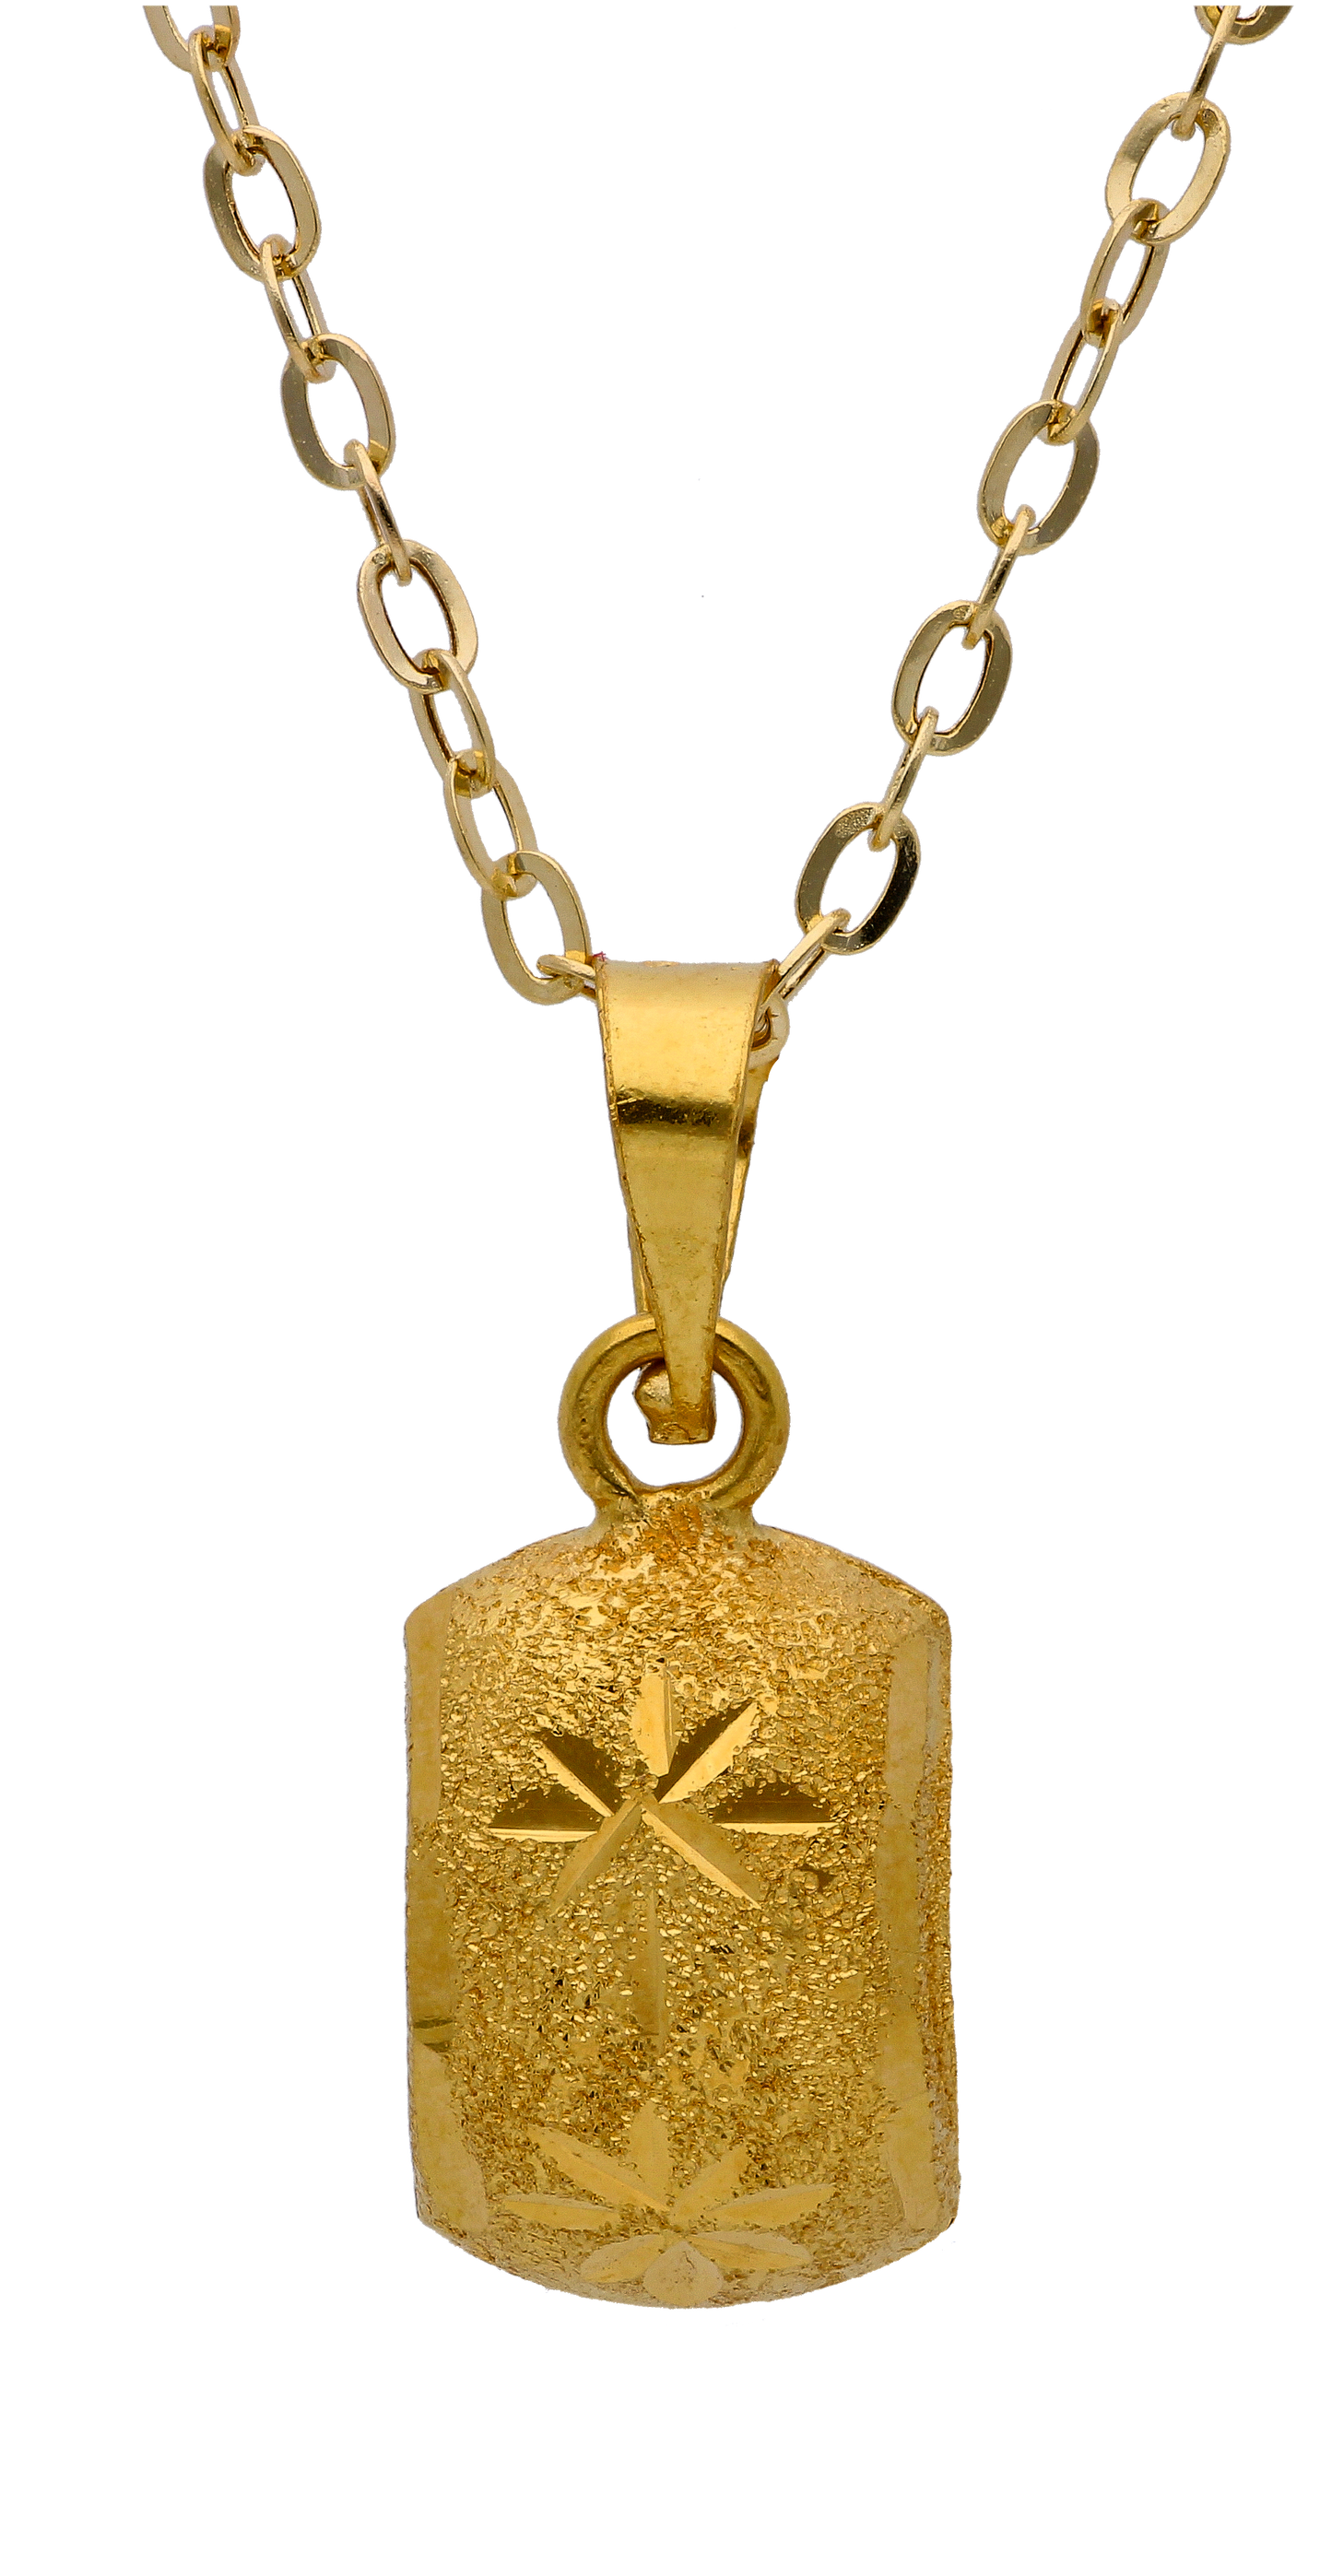 Gold Necklace (Chain with Gold Pendant) 18KT - FKJNKL18KU6291